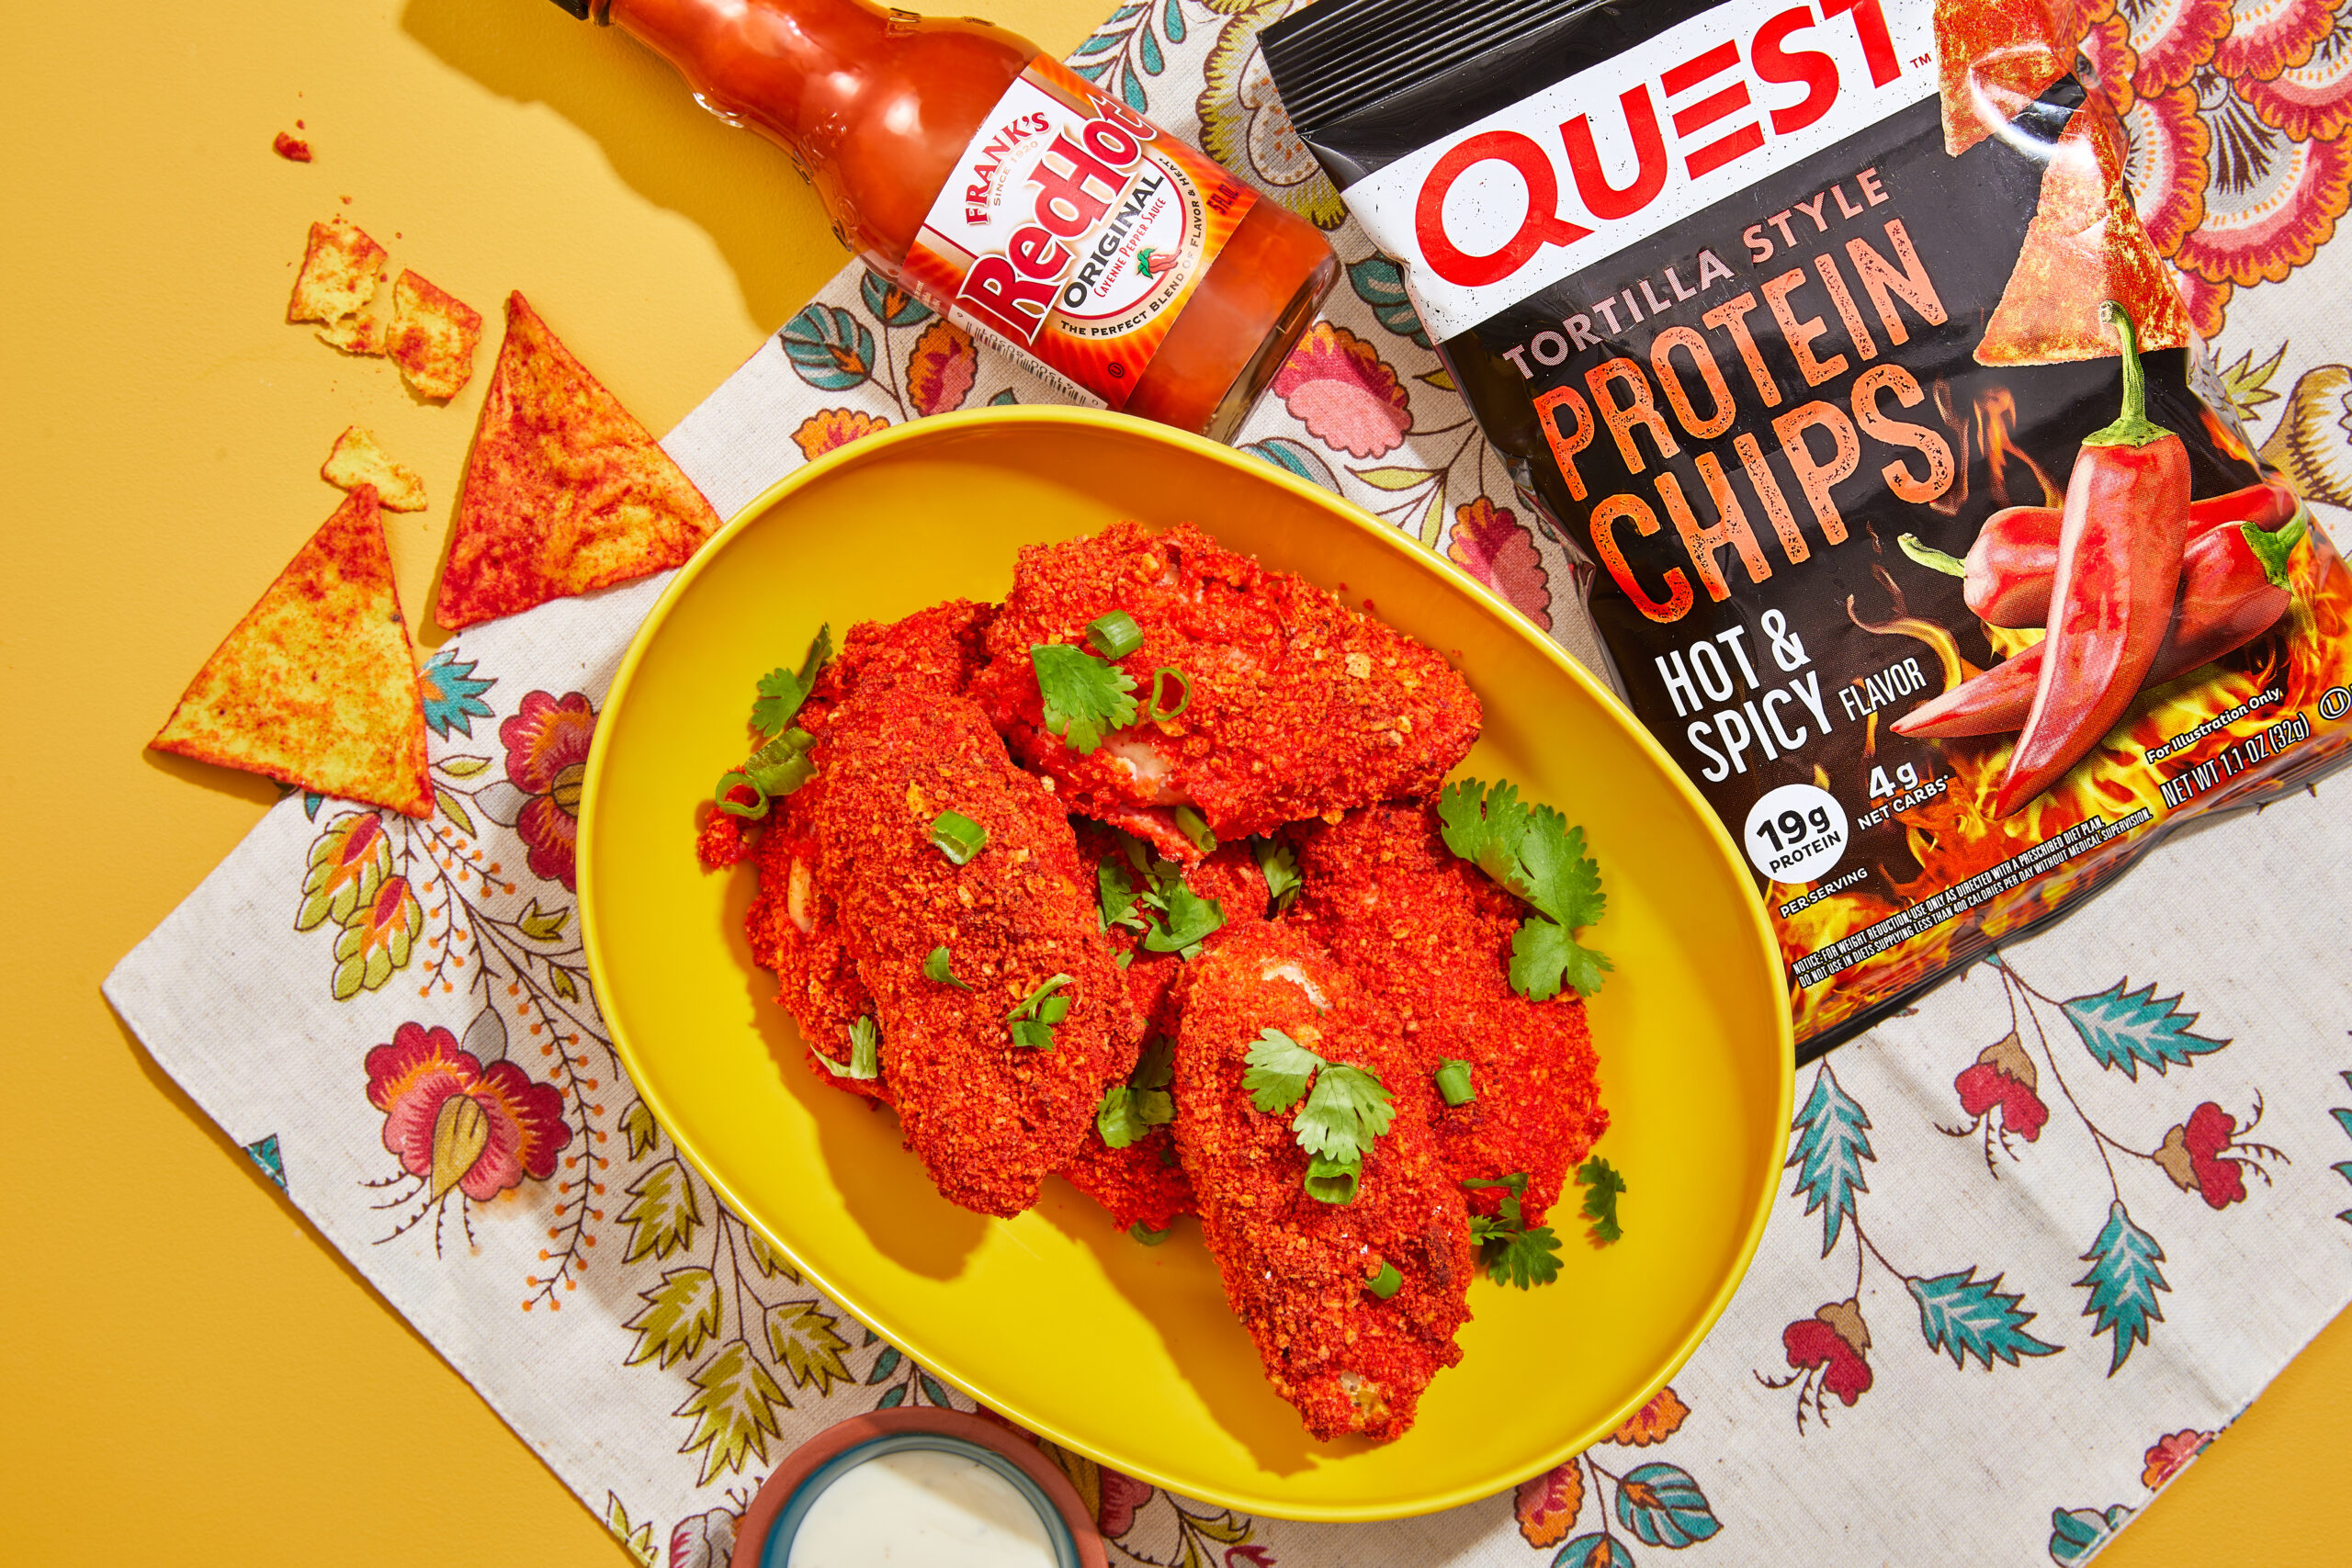 Hot & Spicy Protein Chips x Franks Red Hot